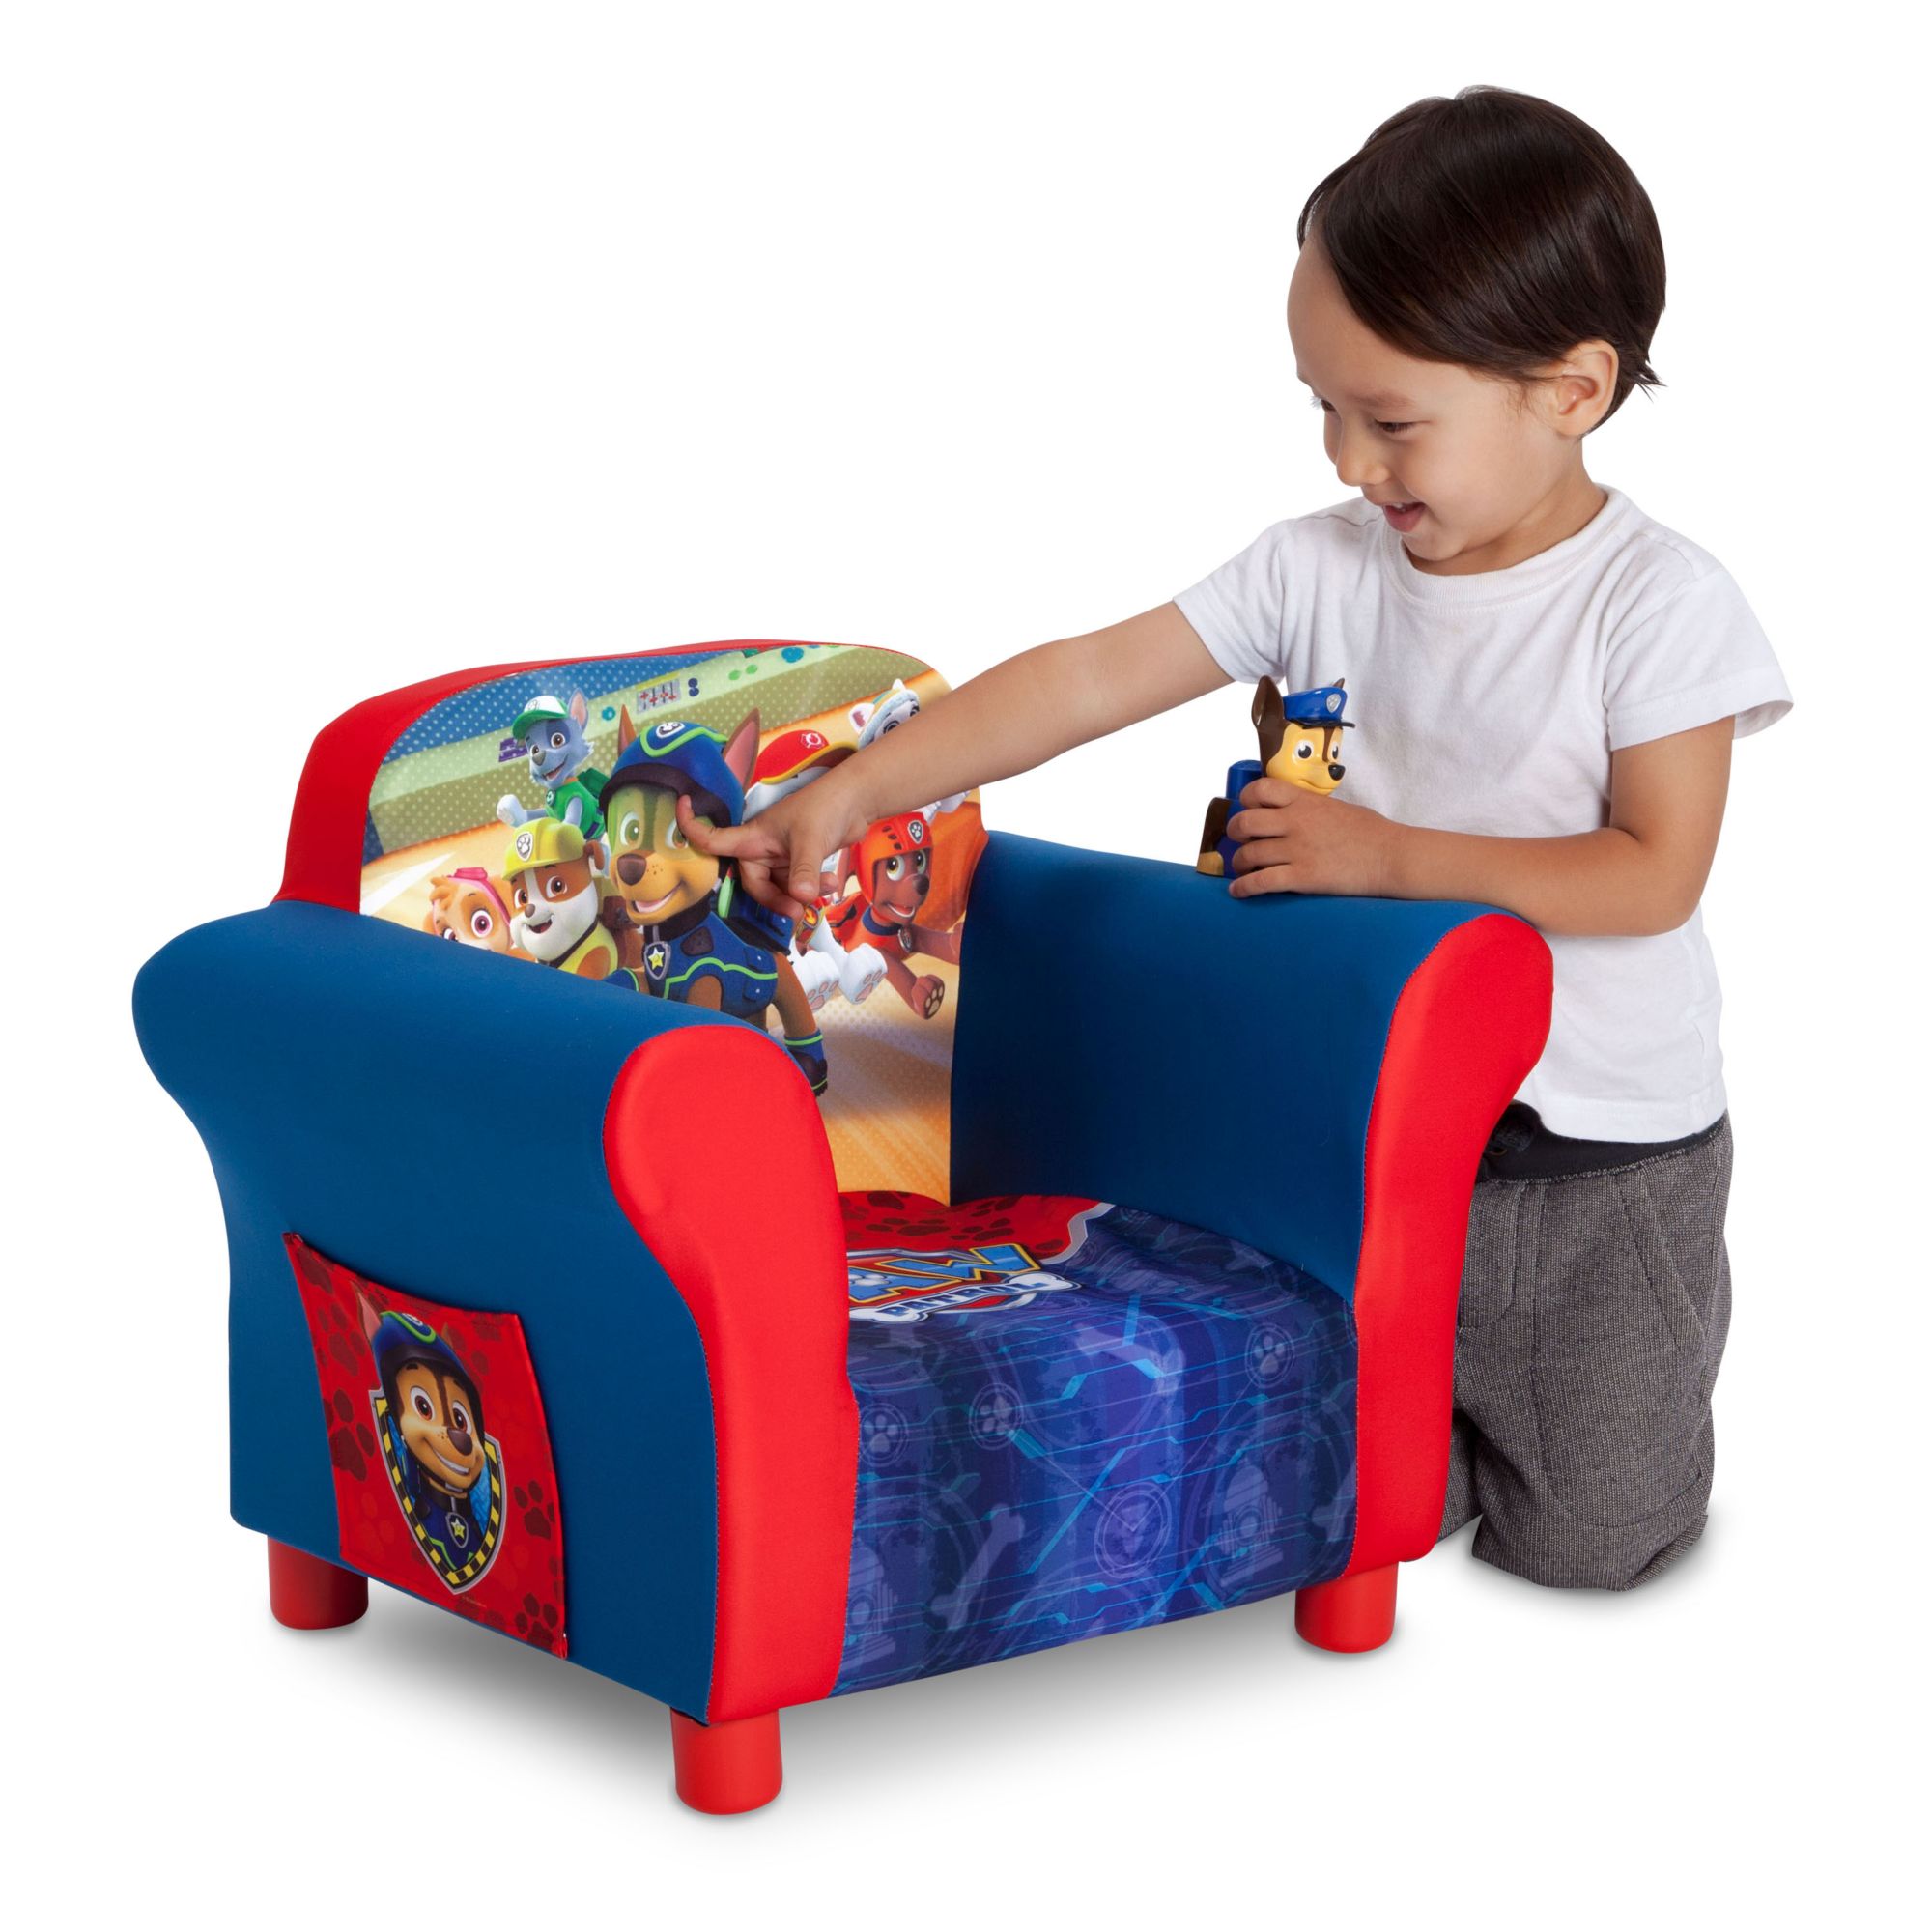  Paw Patrol Table And Chairs